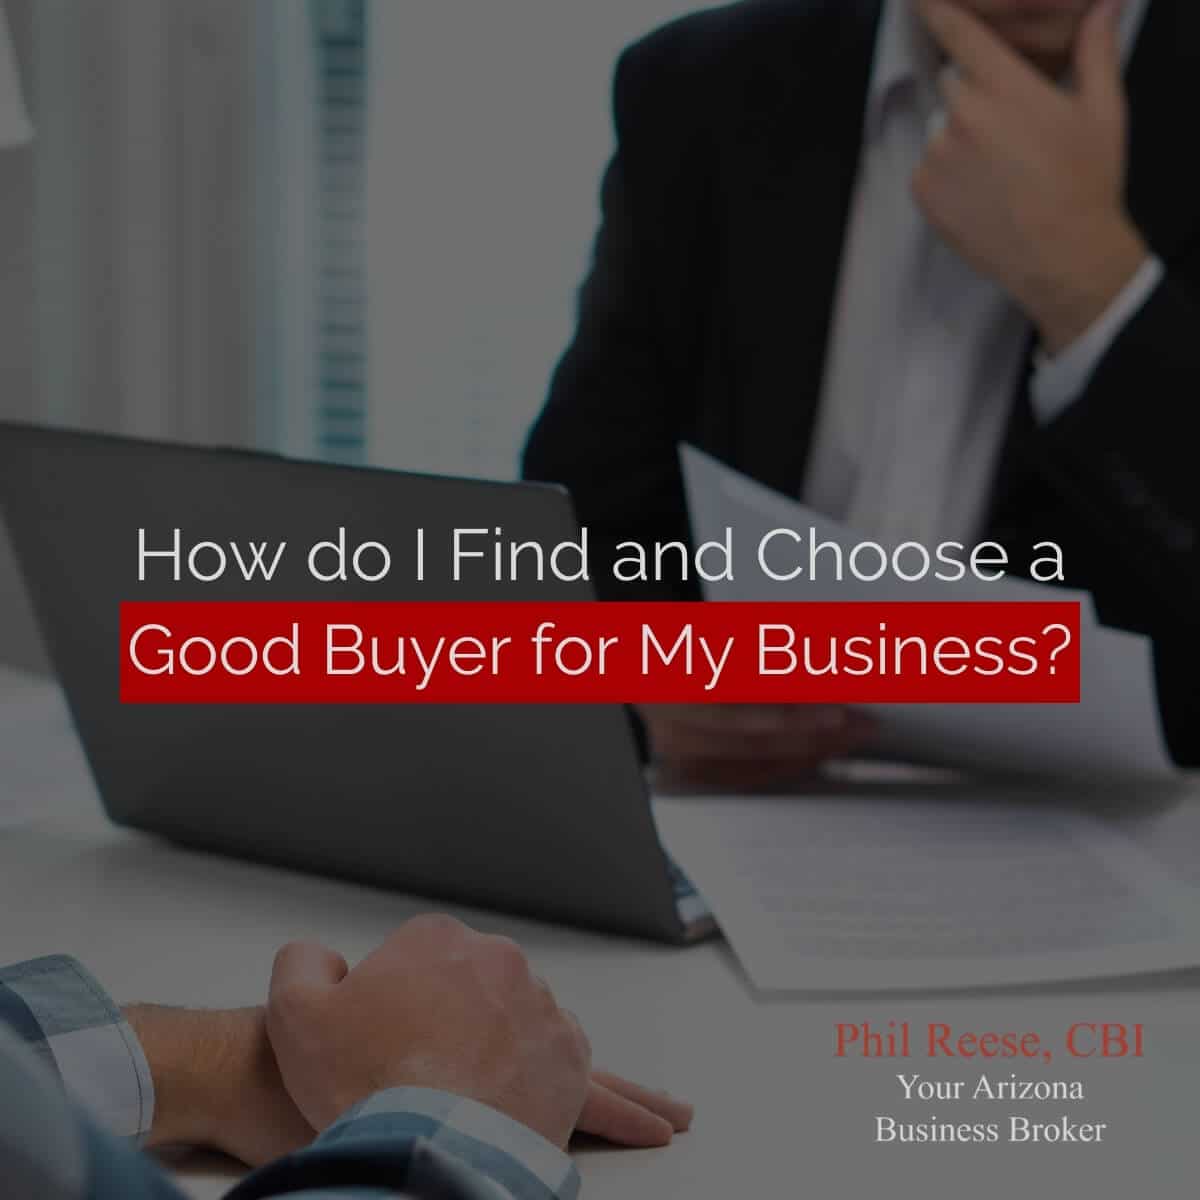 How do I Find and Choose a Good Buyer for My Business